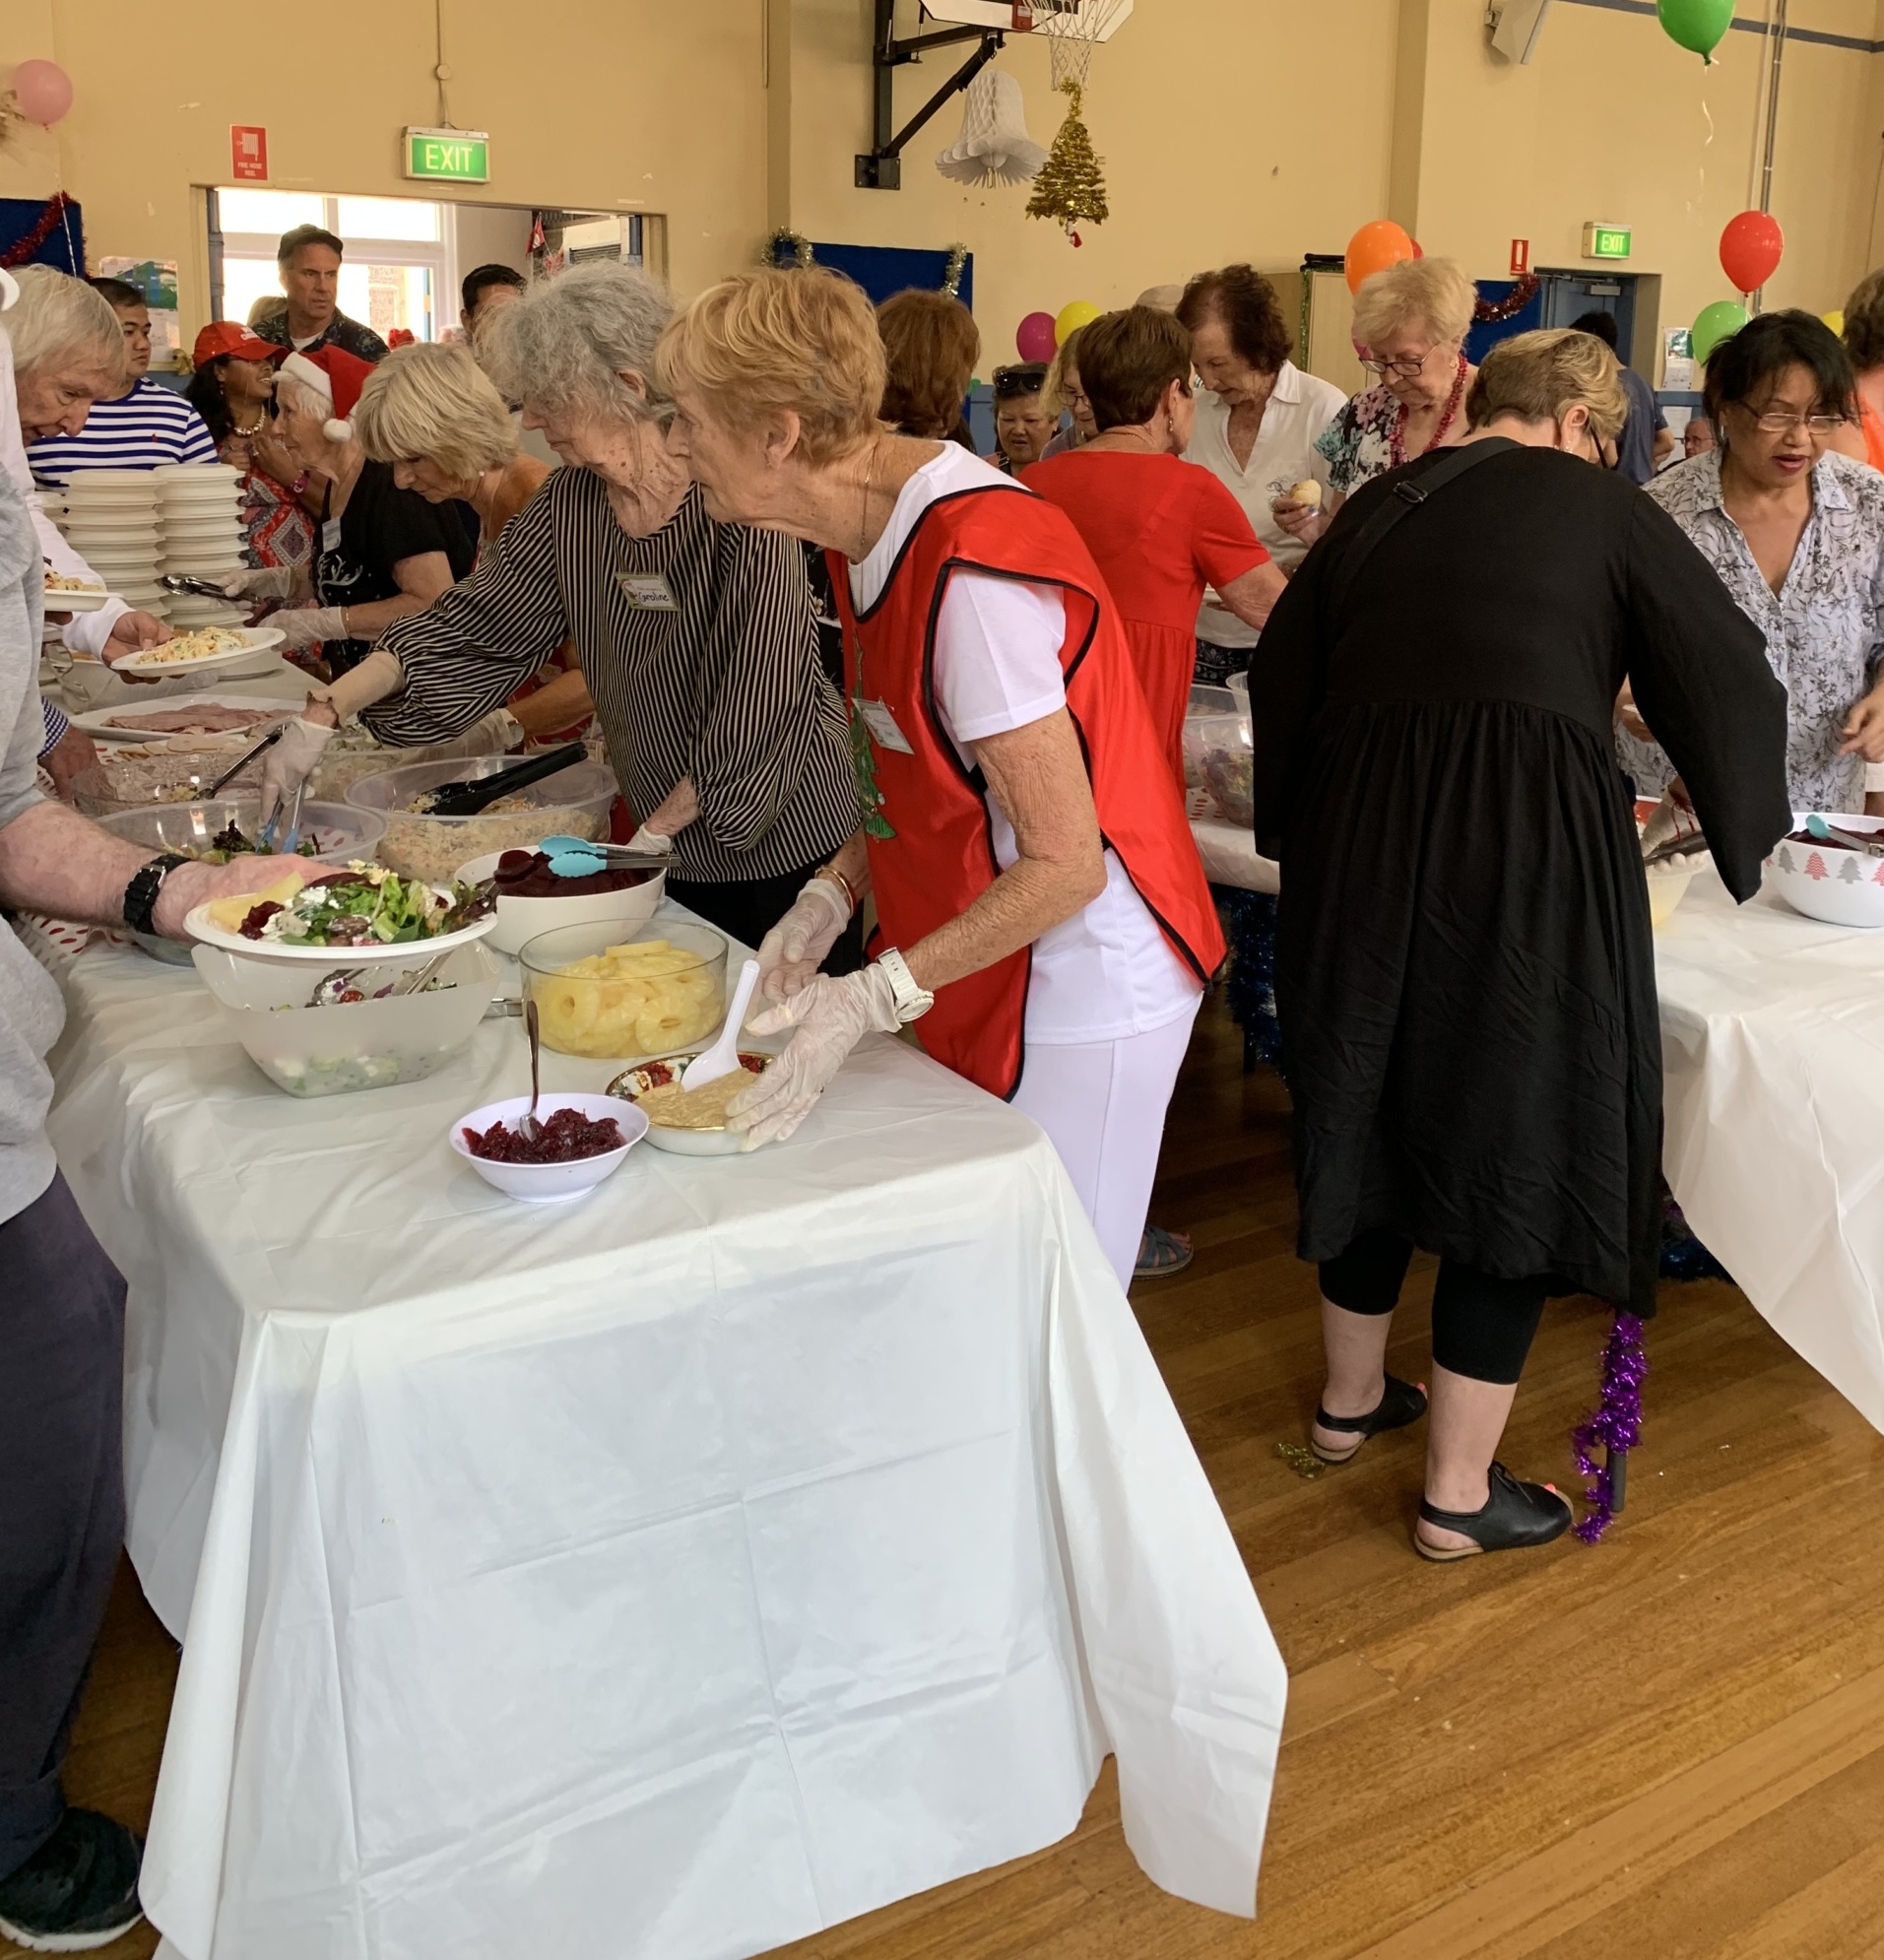 The bustle of serving Christmas lunch!